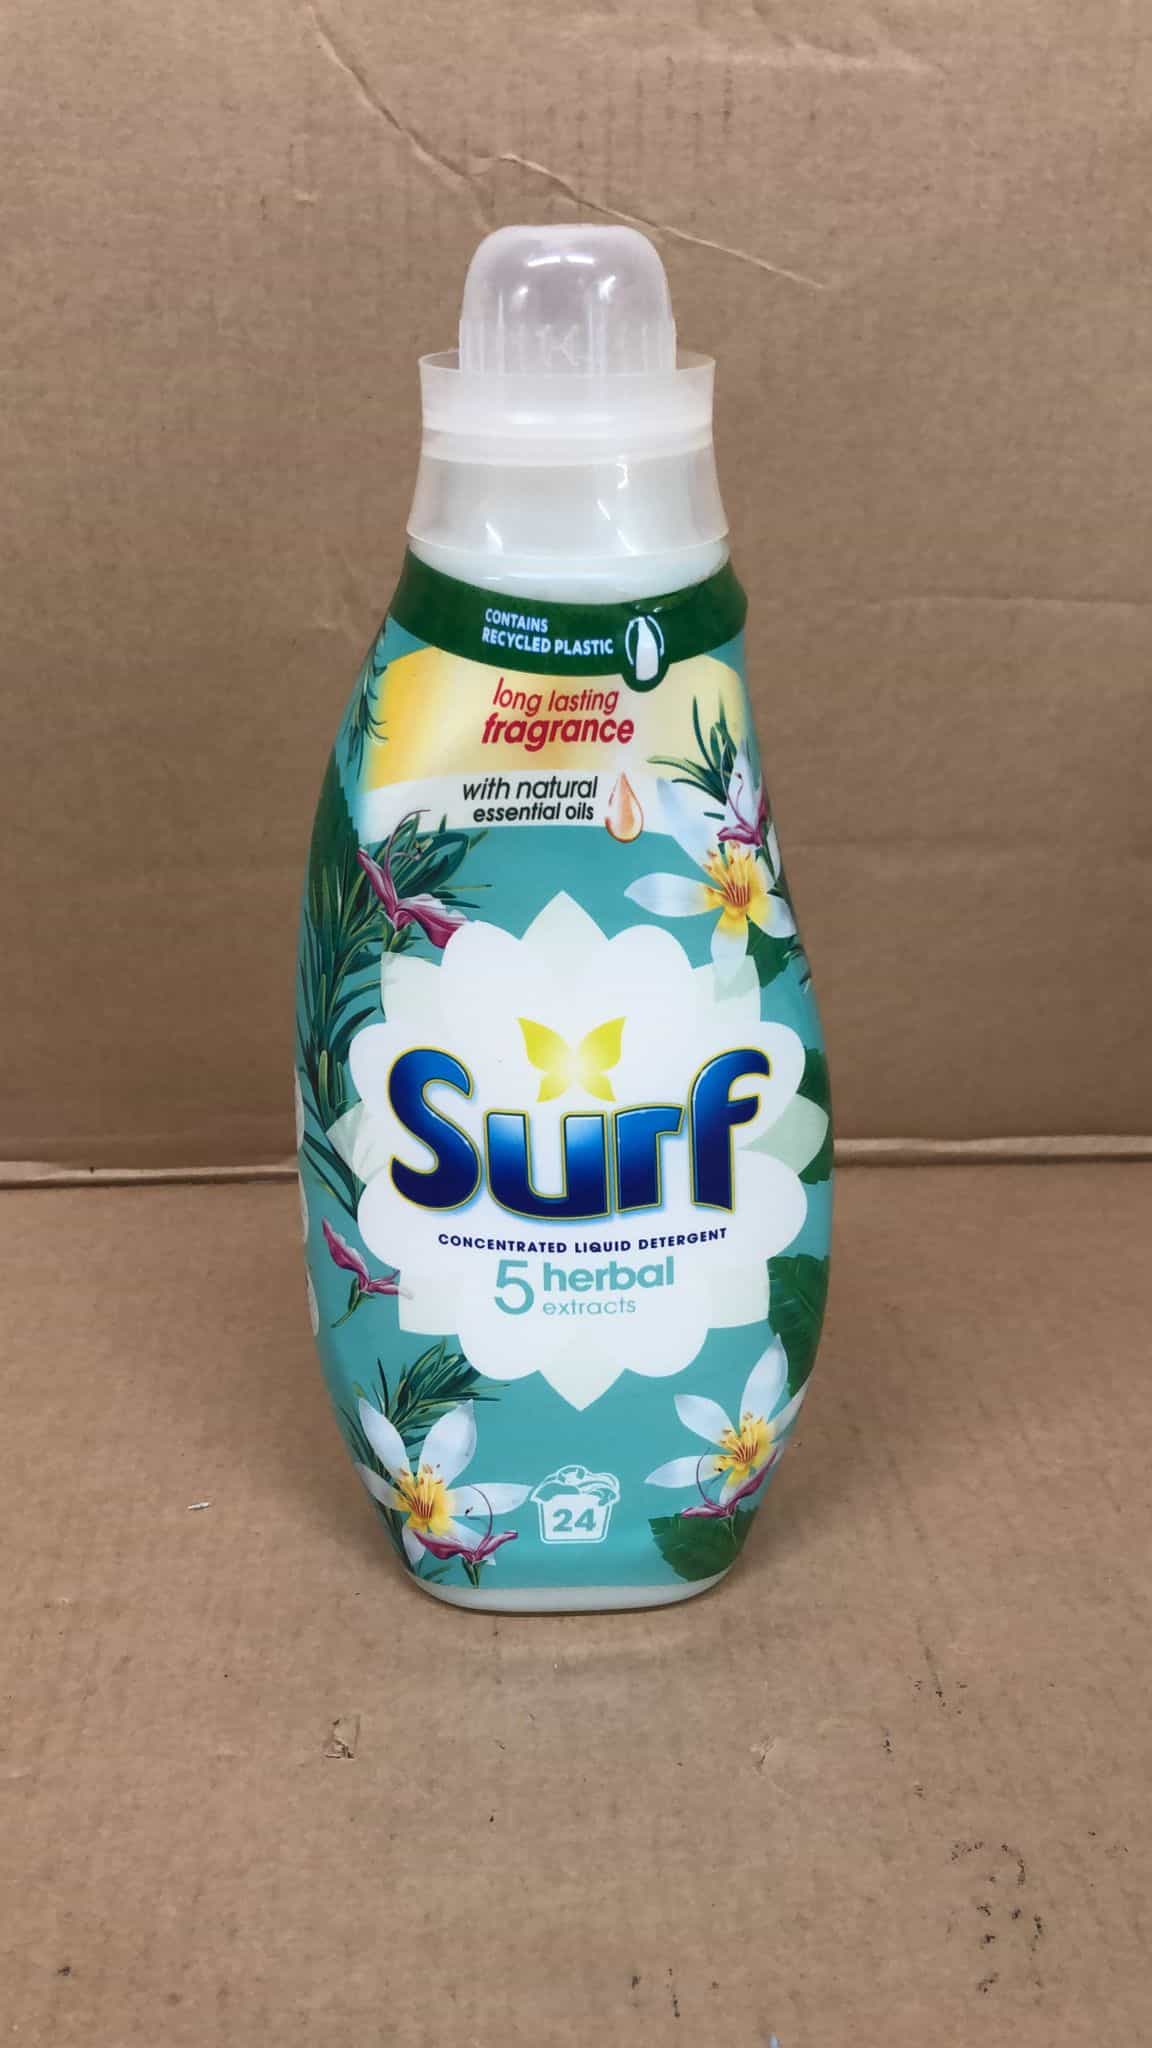 7x Surf 5 Herbal Extracts infused with natural essential oils Concentrated Liquid Laundry Detergent (qty 7)- 9812